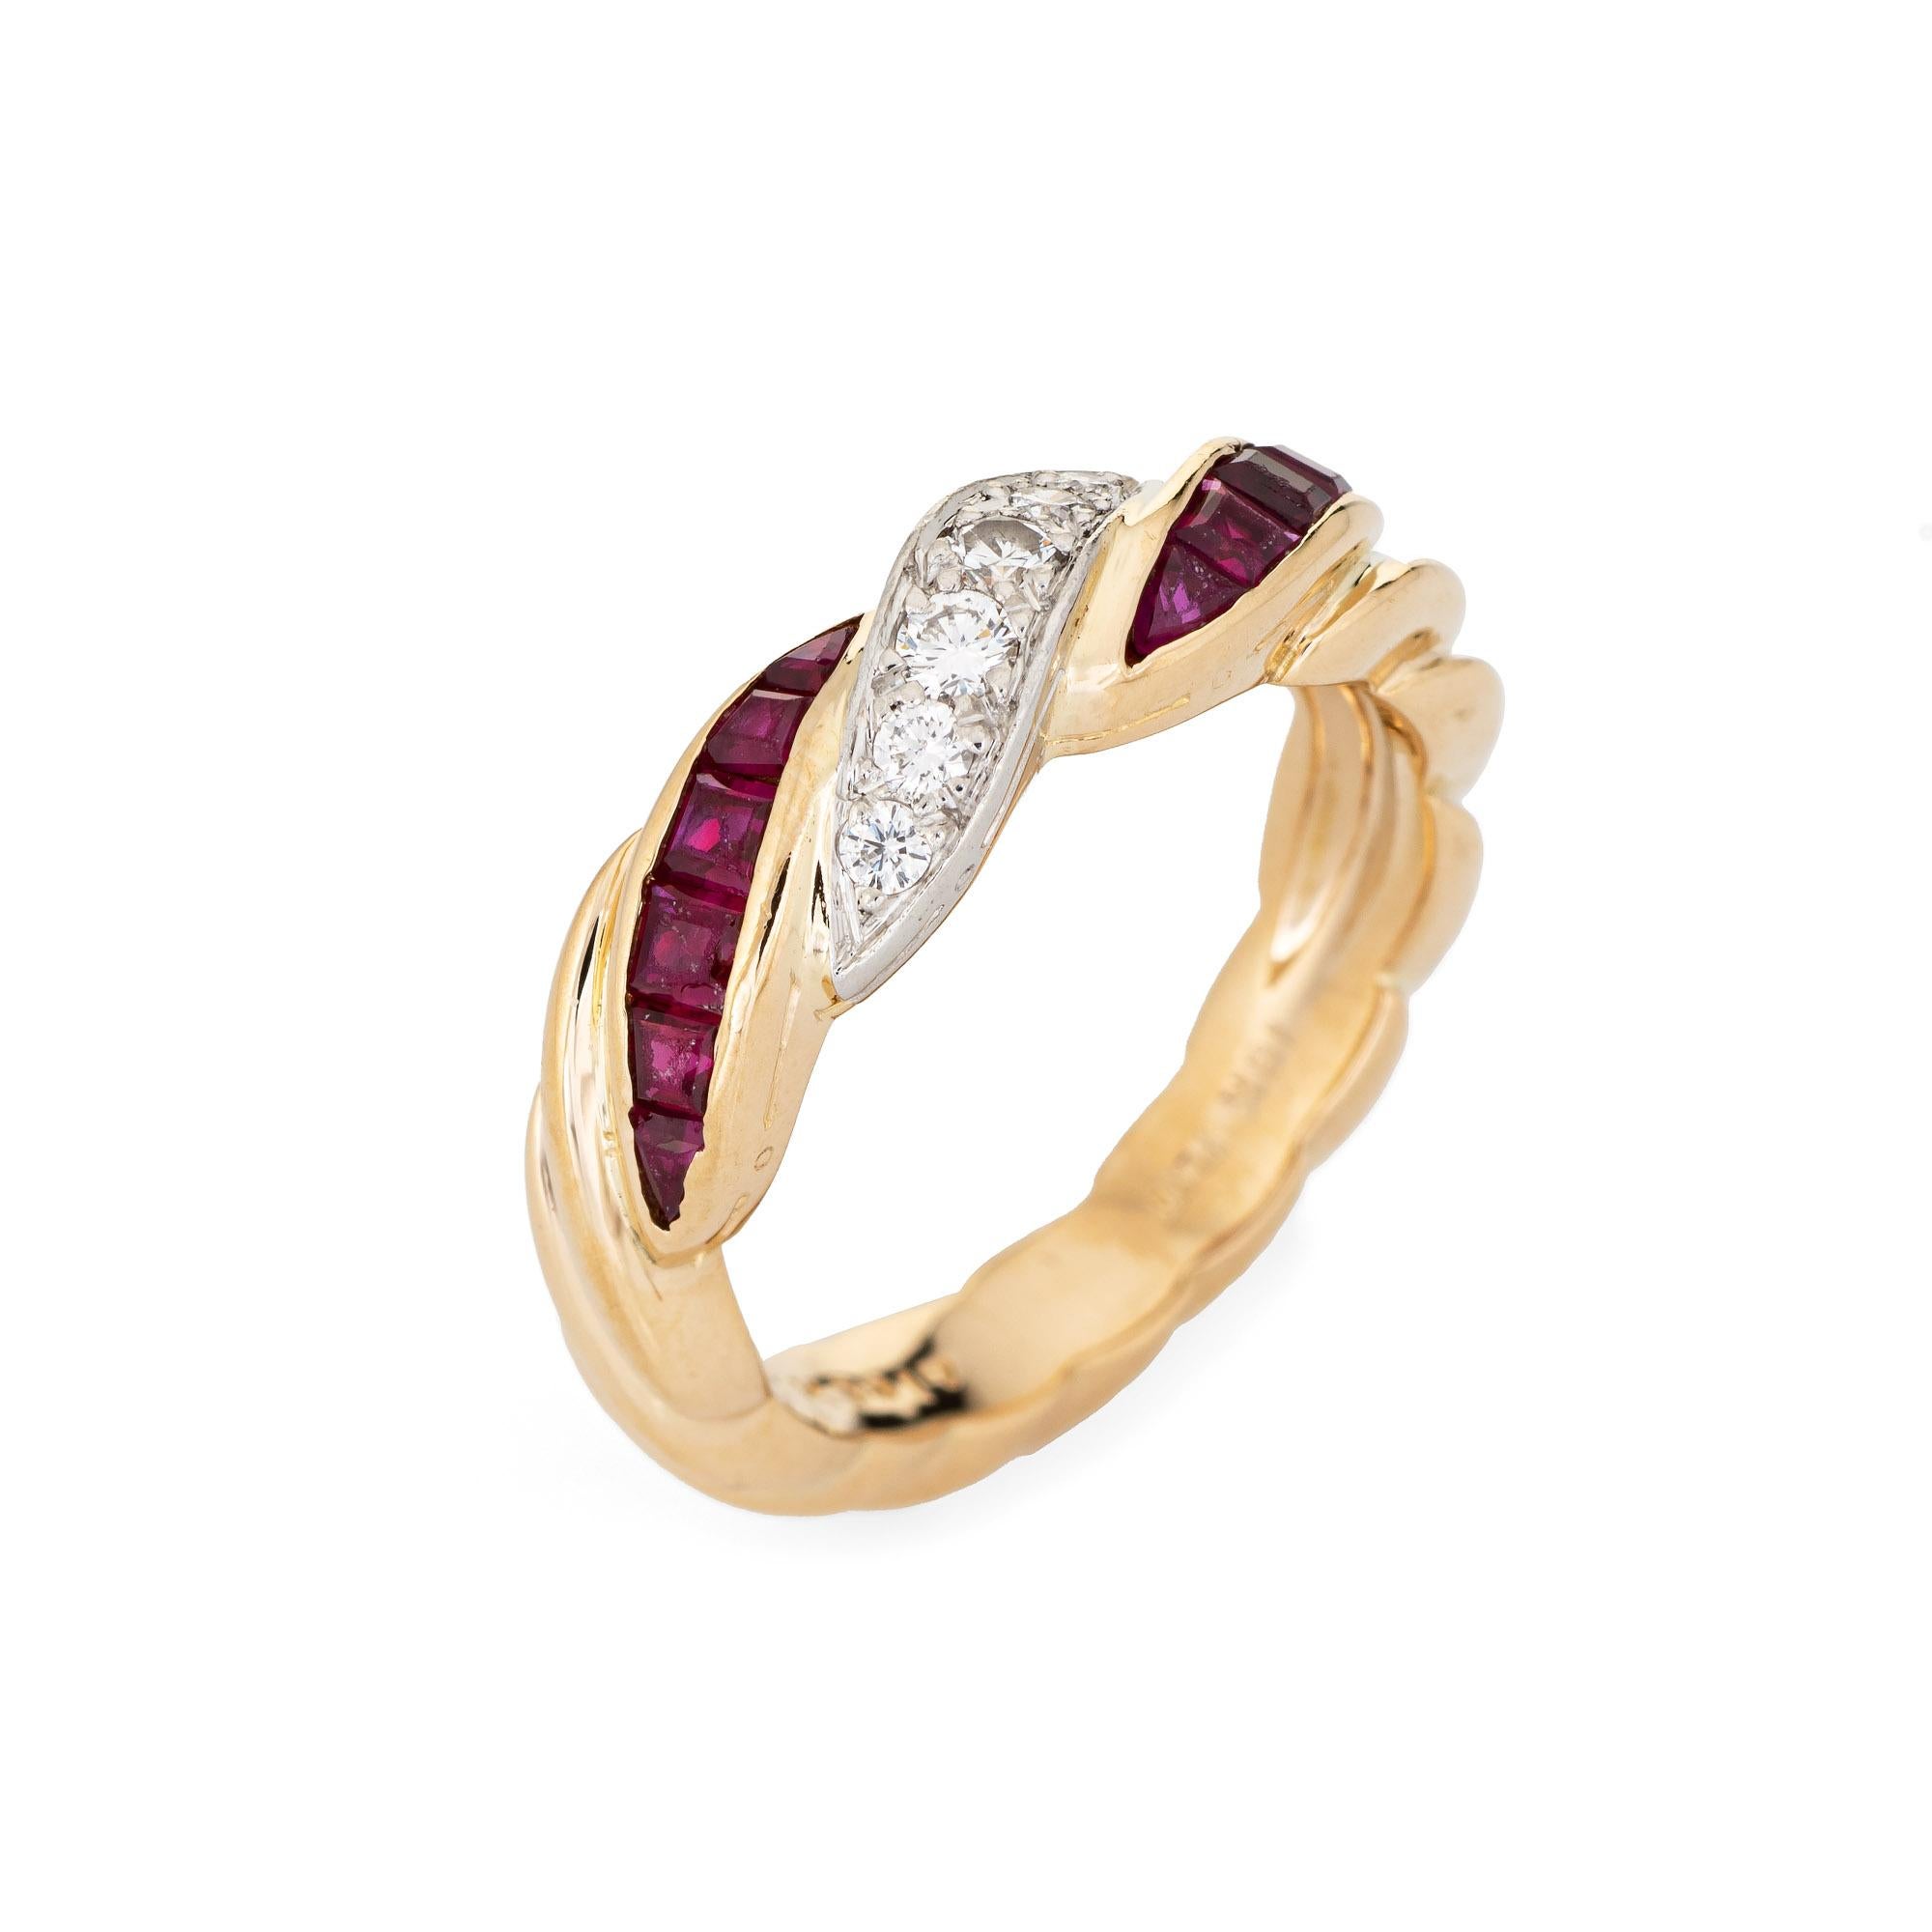 Stylish vintage Oscar Heyman diamond & ruby ring crafted in 18 karat yellow gold and platinum. 

Six round brilliant cut diamonds total an estimated 0.20 carats (estimated at F-G color and VVS2 clarity). Twelve square cut rubies total an estimated